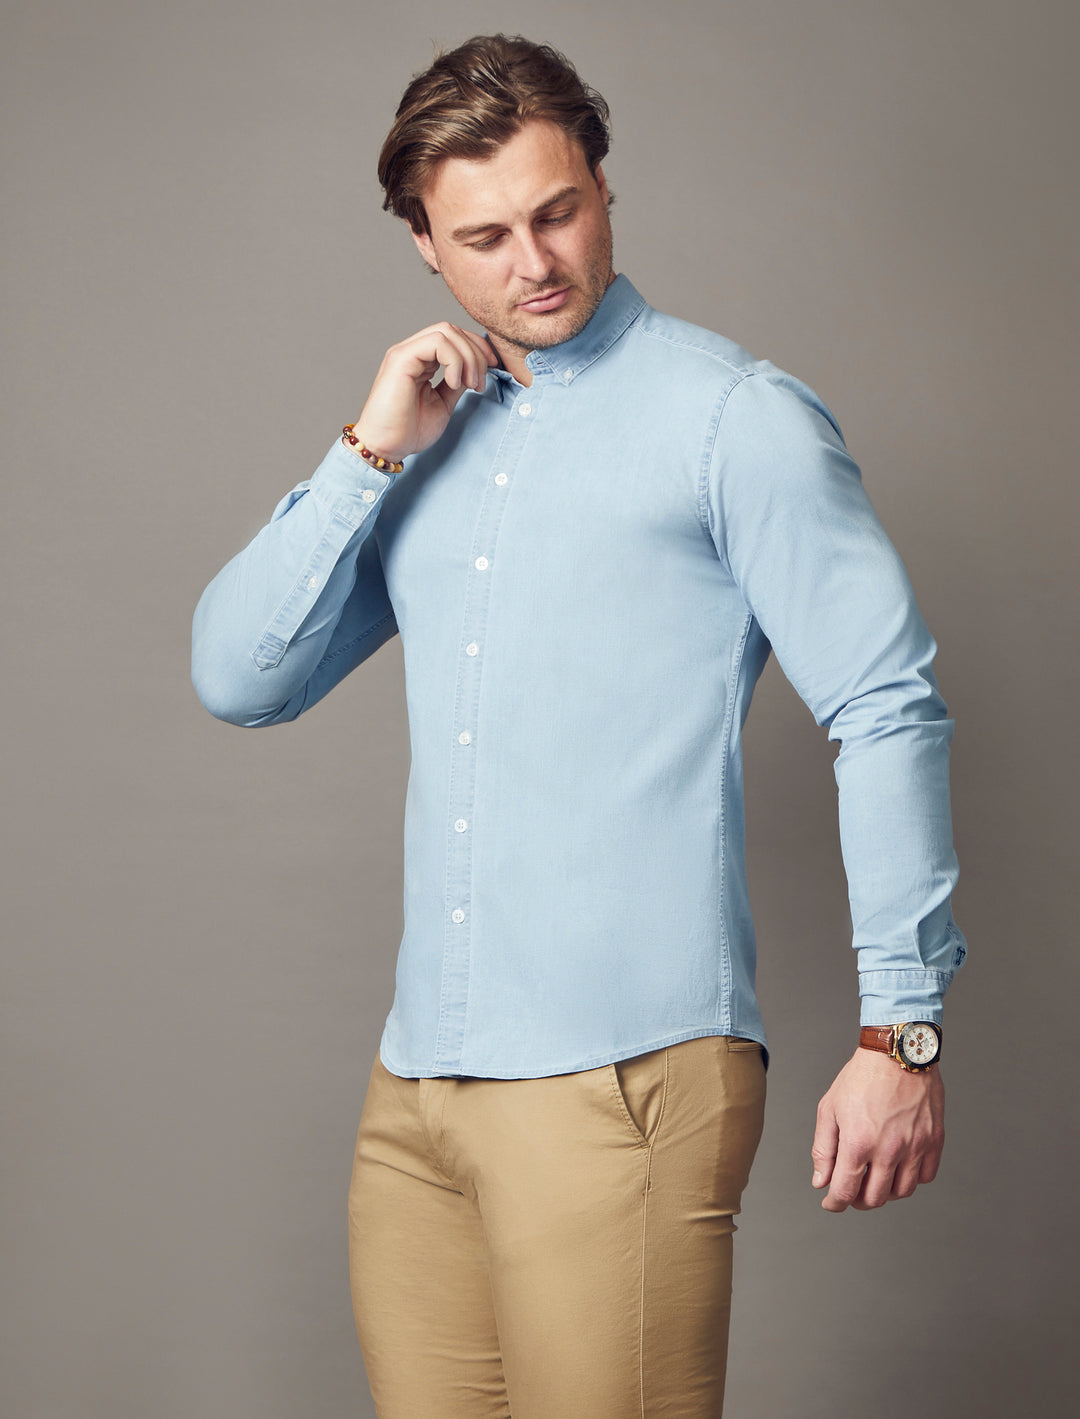 light wash denim muscle fit shirt, highlighting the tapered fit and superior quality offered by Tapered Menswear